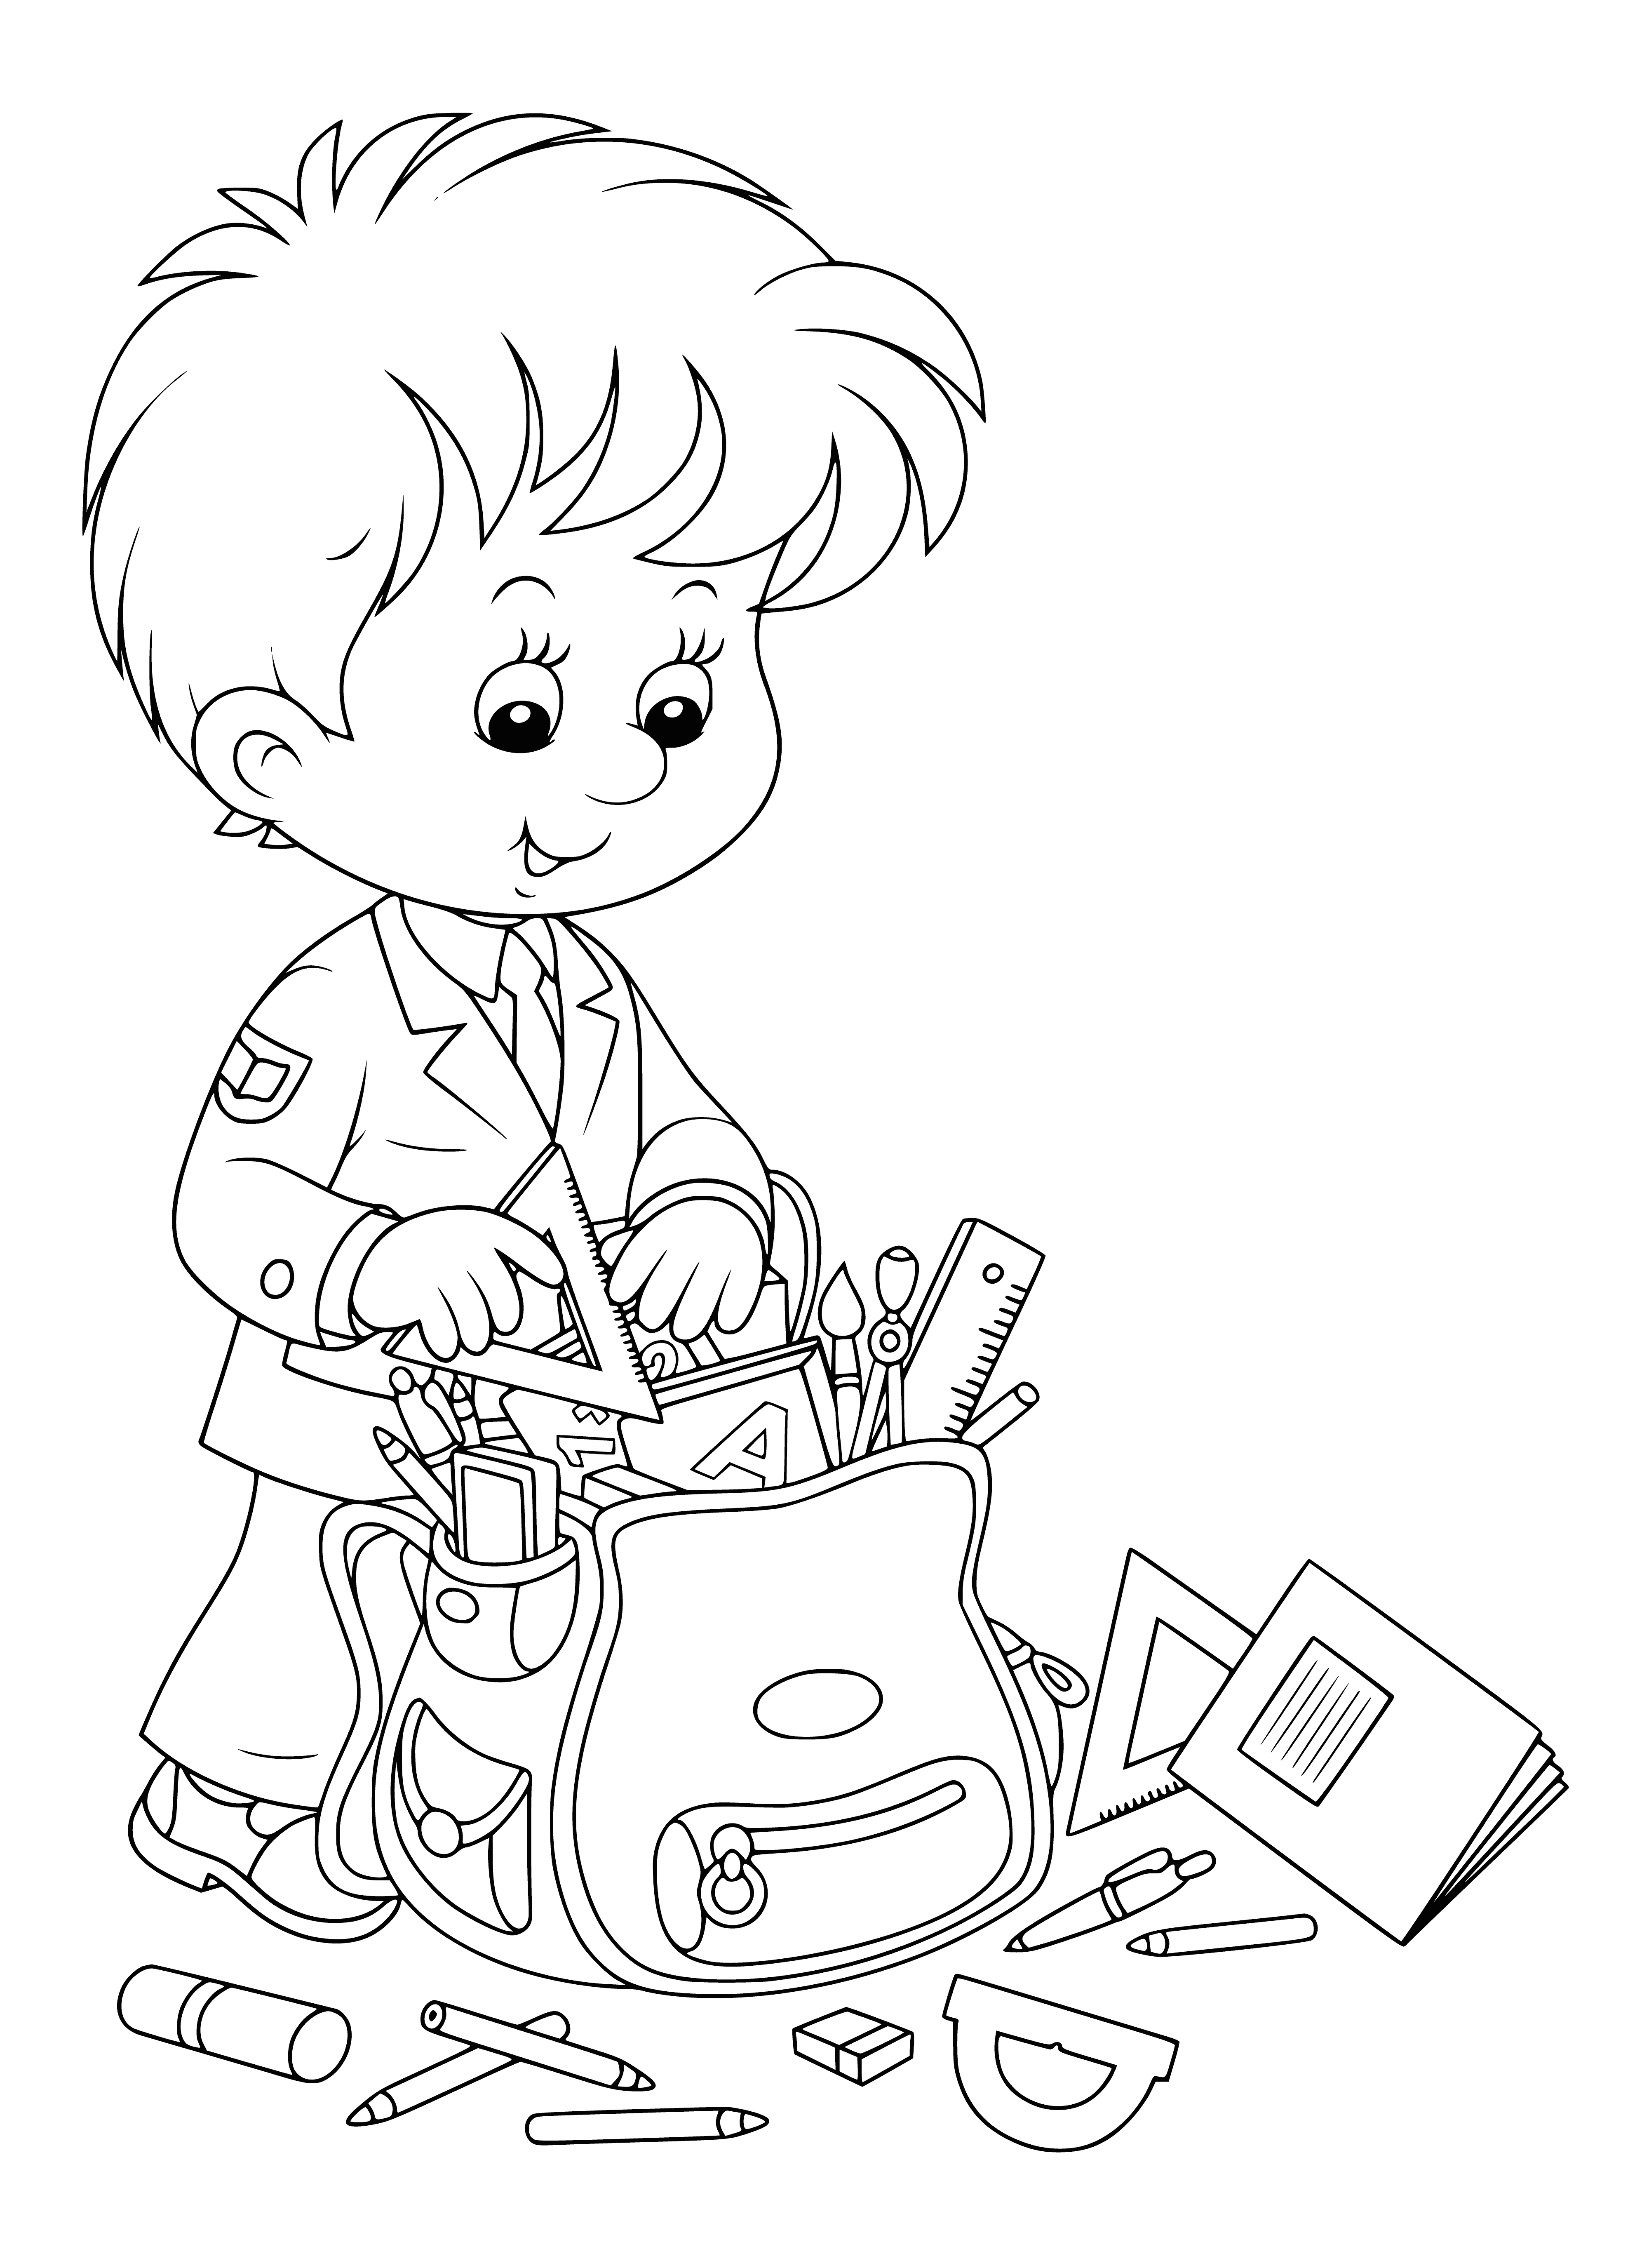 Boy collects a briefcase coloring page